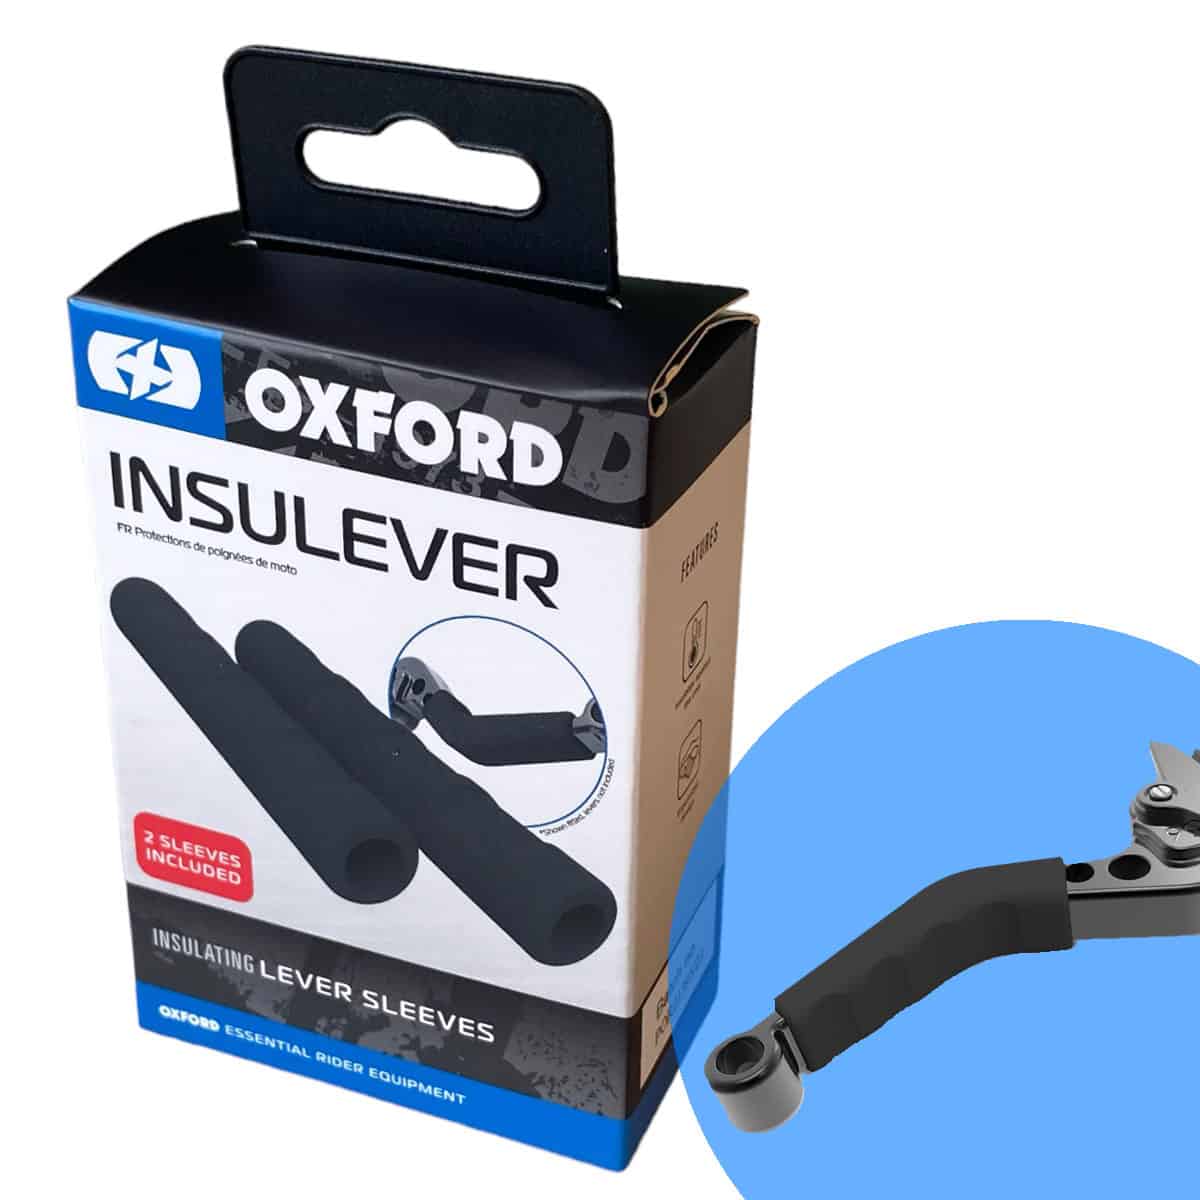 Foam Brake/Clutch Lever Sleeves: Insulate your Finger Tips from the cold of the levers